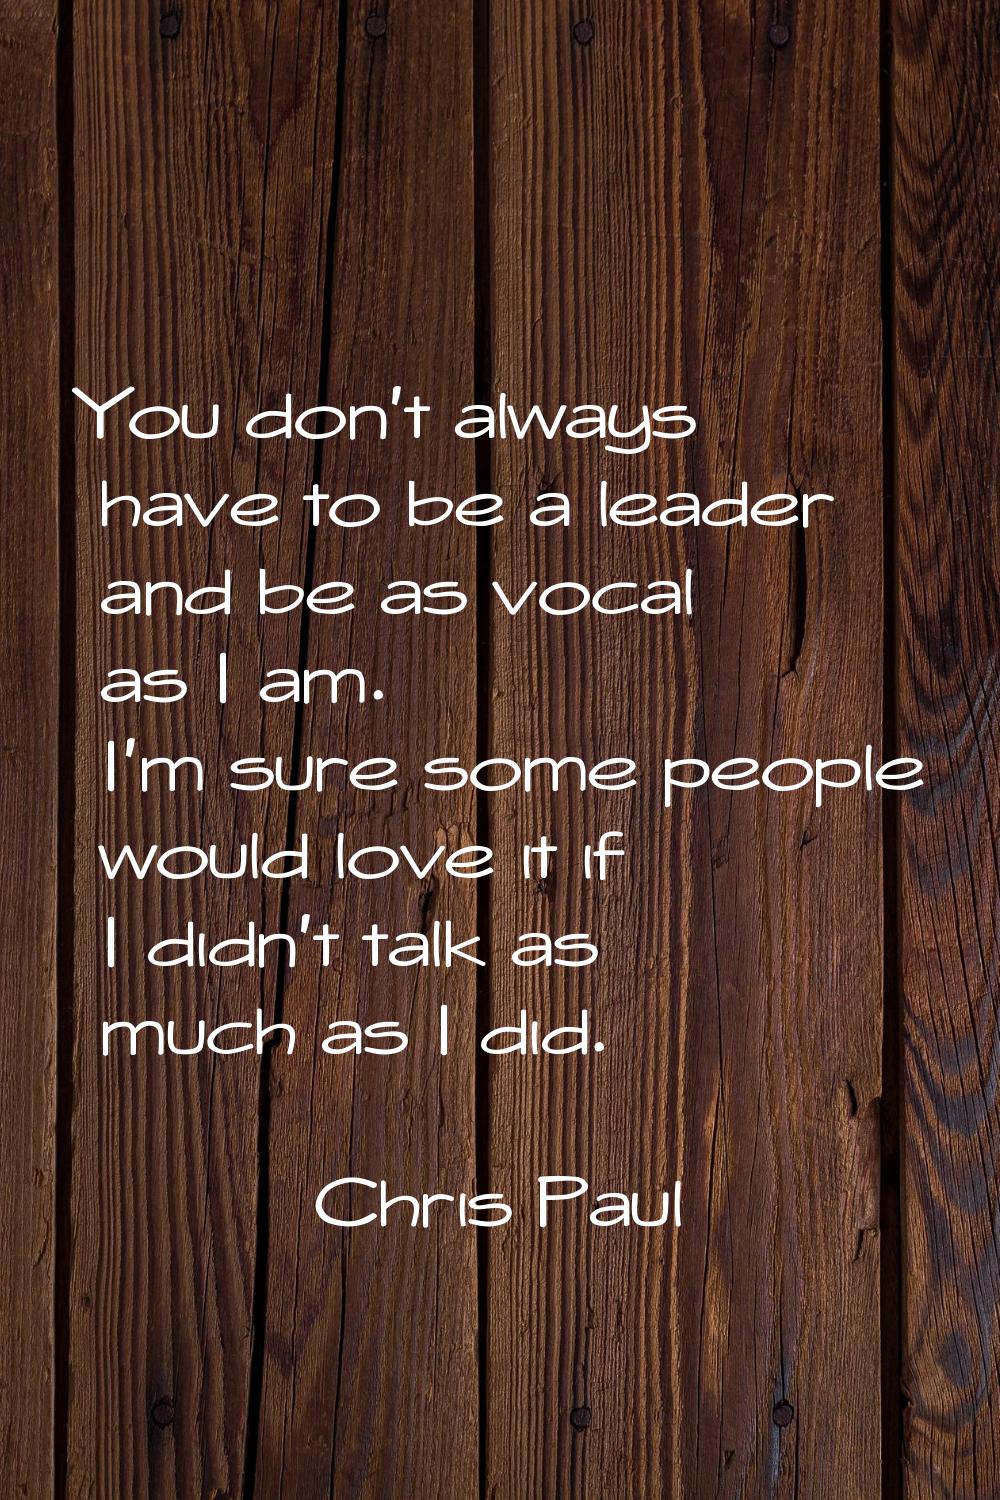 You don't always have to be a leader and be as vocal as I am. I'm sure some people would love it if